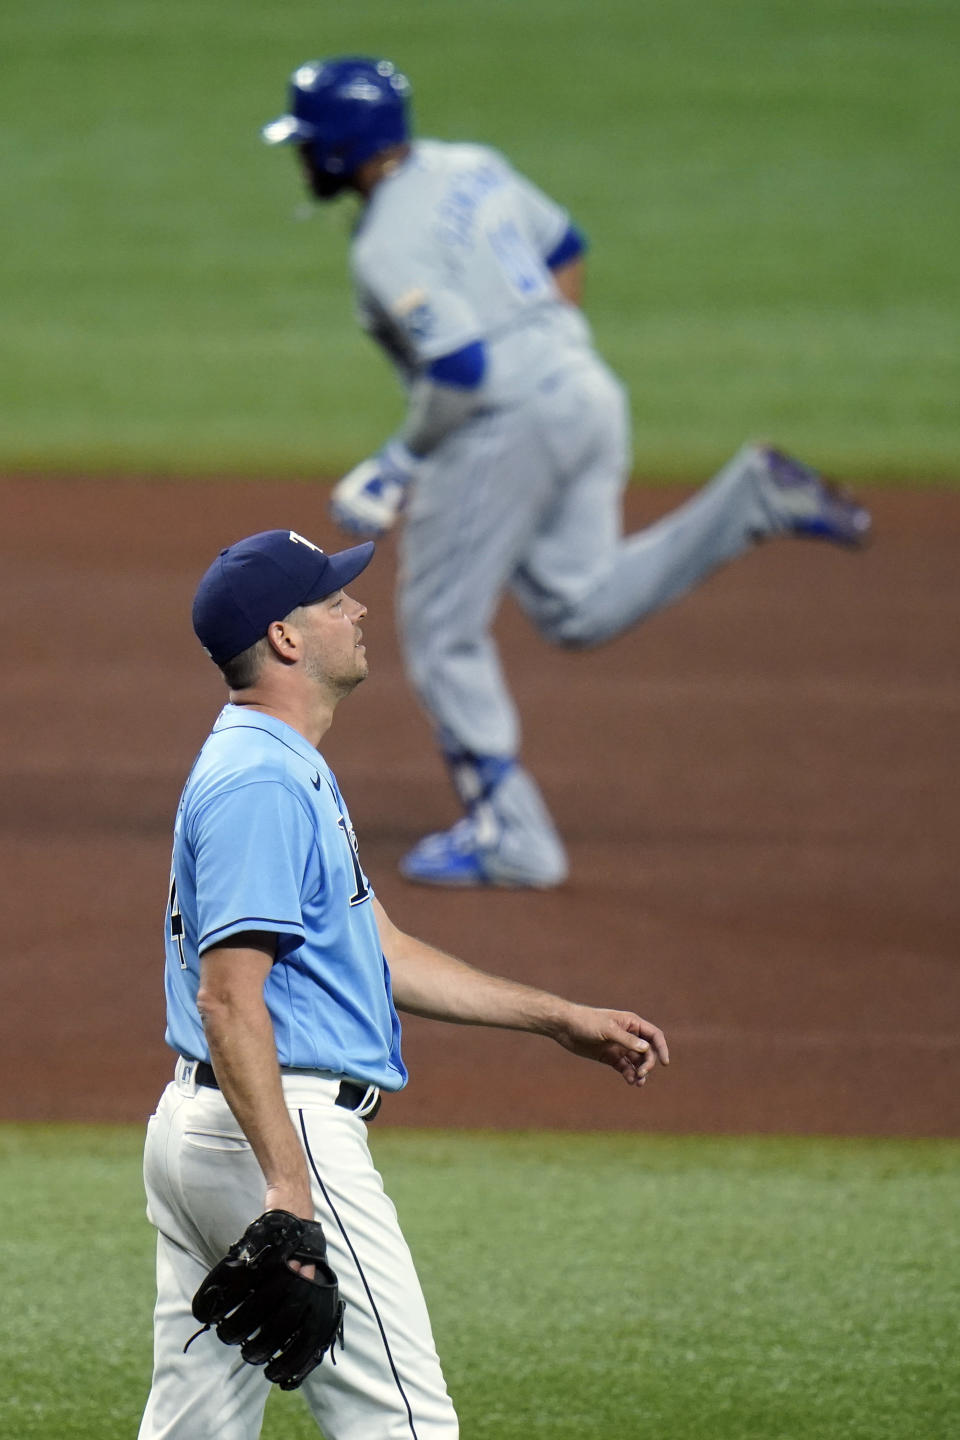 Tampa Bay Rays starting pitcher Rich Hill reacts as Kansas City Royals' Carlos Santana runs around the bases following his solo home run during the fourth inning of a baseball game Tuesday, May 25, 2021, in St. Petersburg, Fla. (AP Photo/Chris O'Meara)